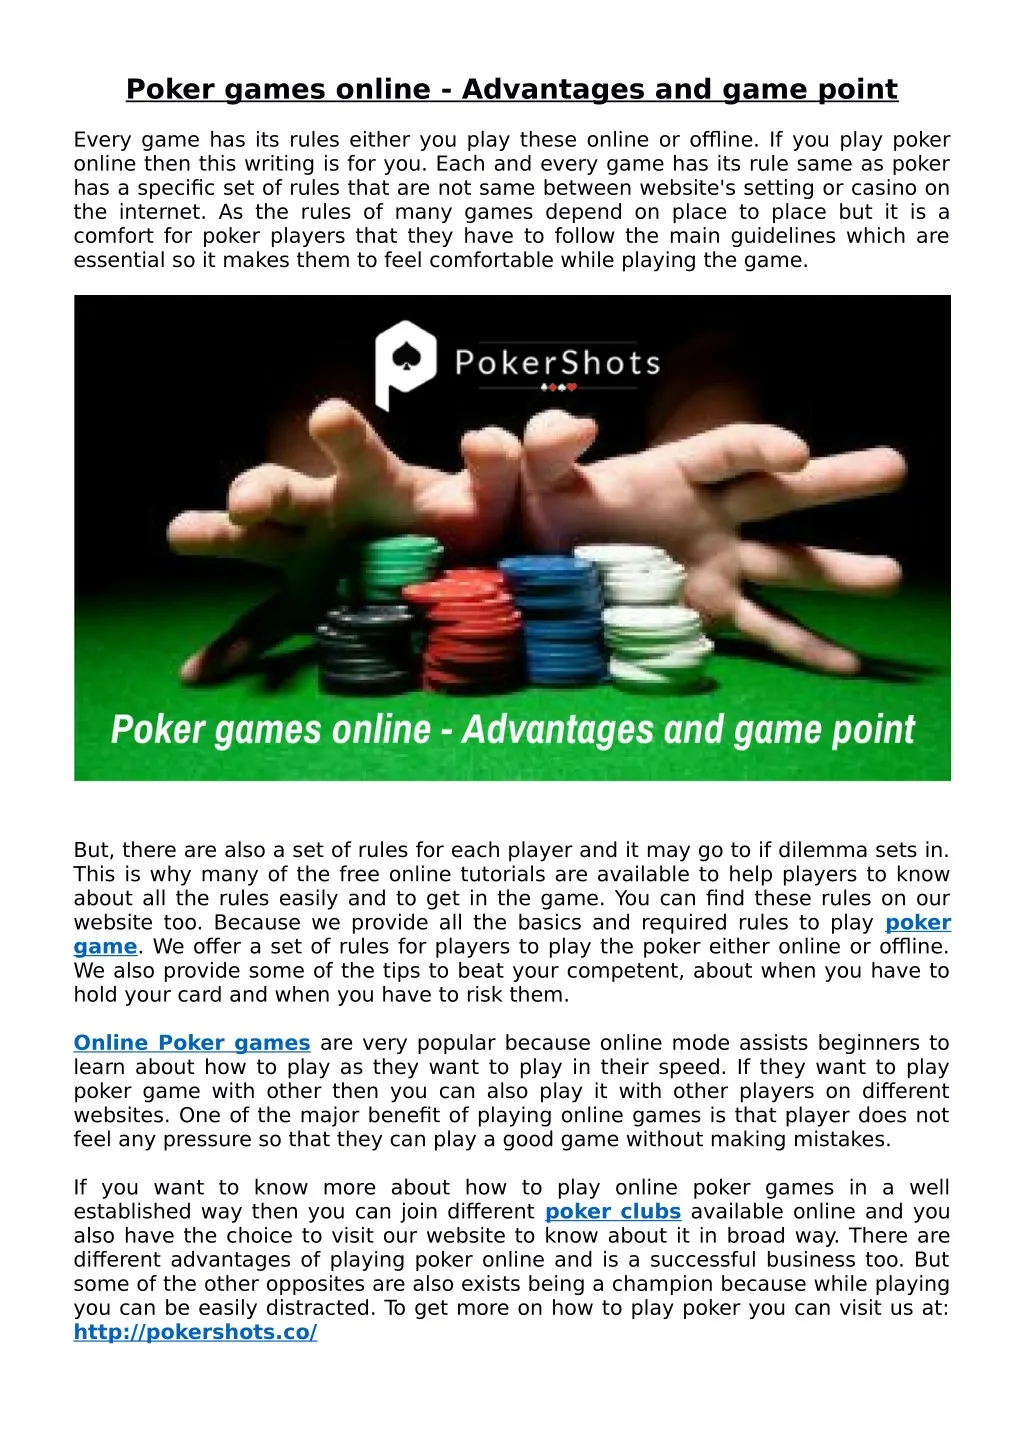 poker games online advantages and game point